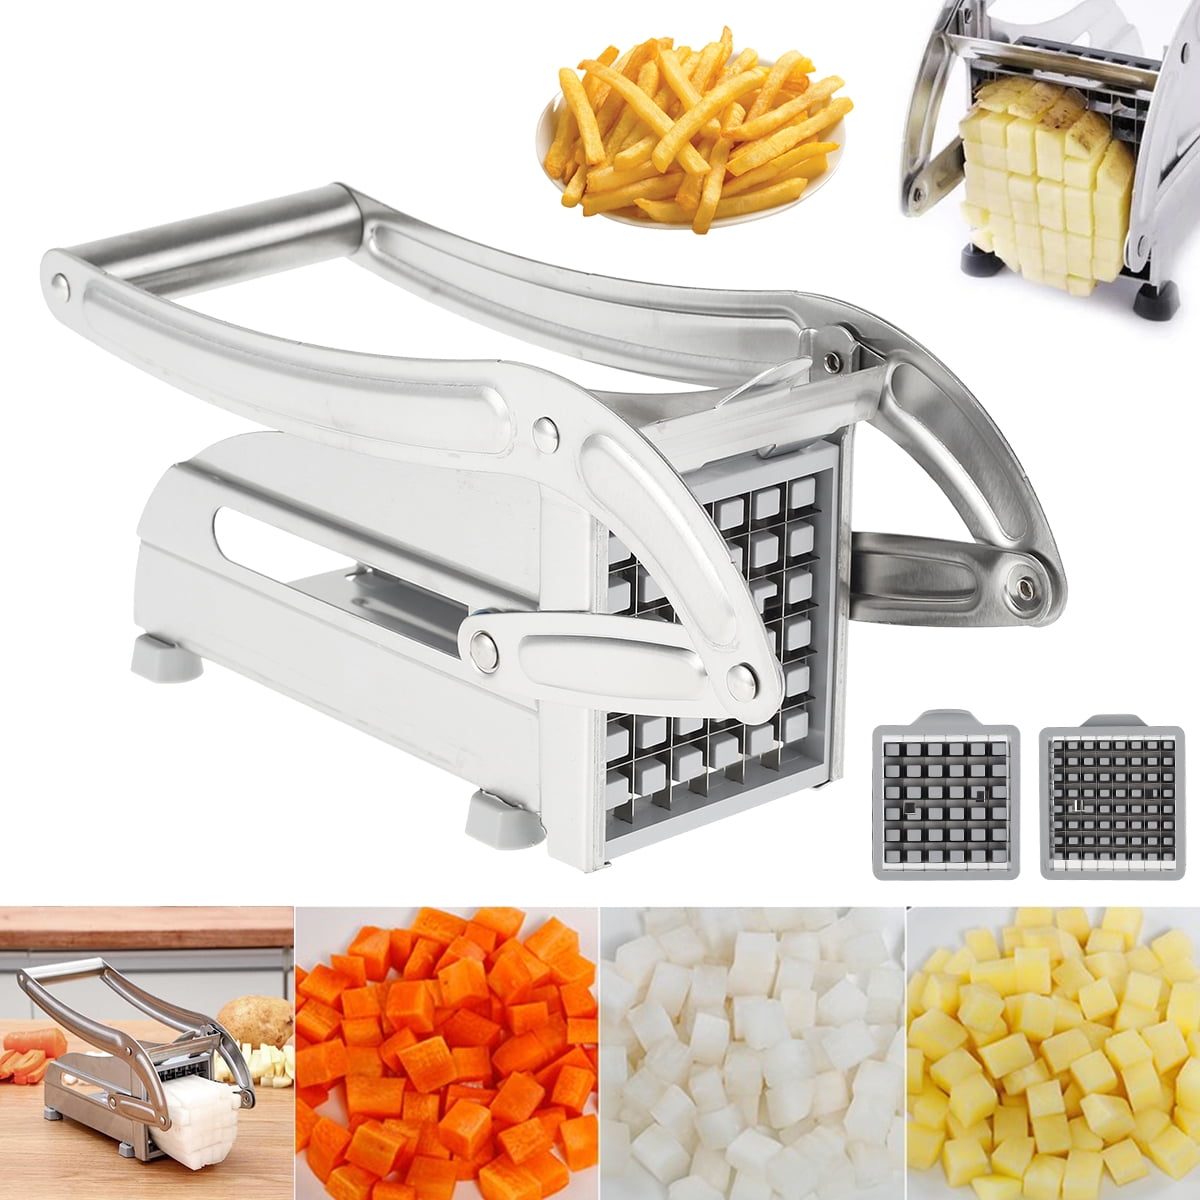 Stainless Steel French Fry Potato Cutter/Slicer – Daily Cool Gadgets